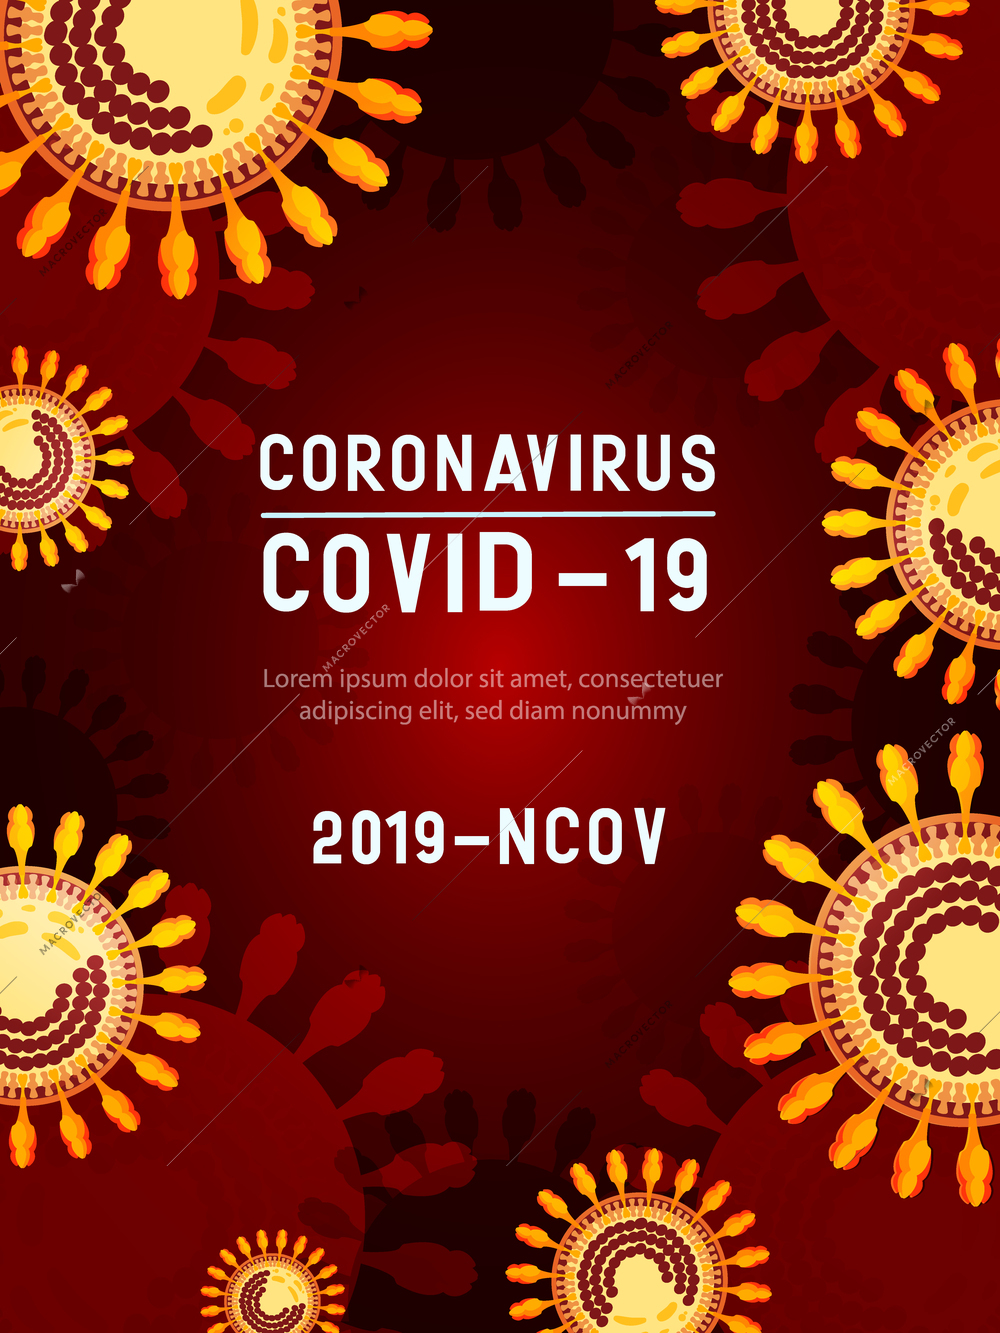 Coronavirus virus frame vertical background with composition of editable text surrounded by flat infected bacteria images vector illustration